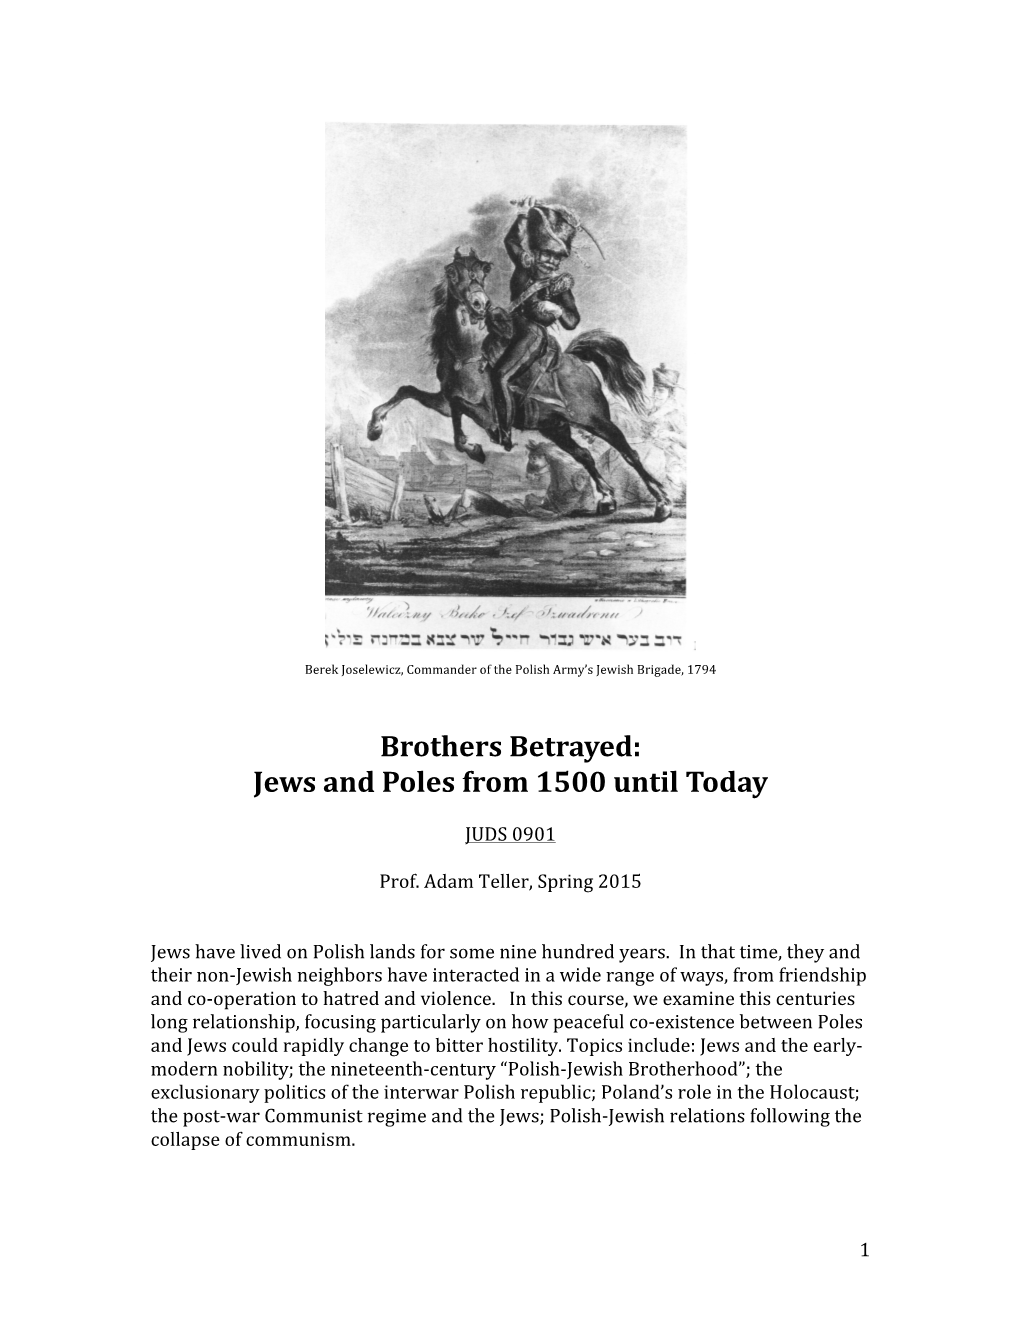 Brothers Betrayed: Jews and Poles from 1500 Until Today